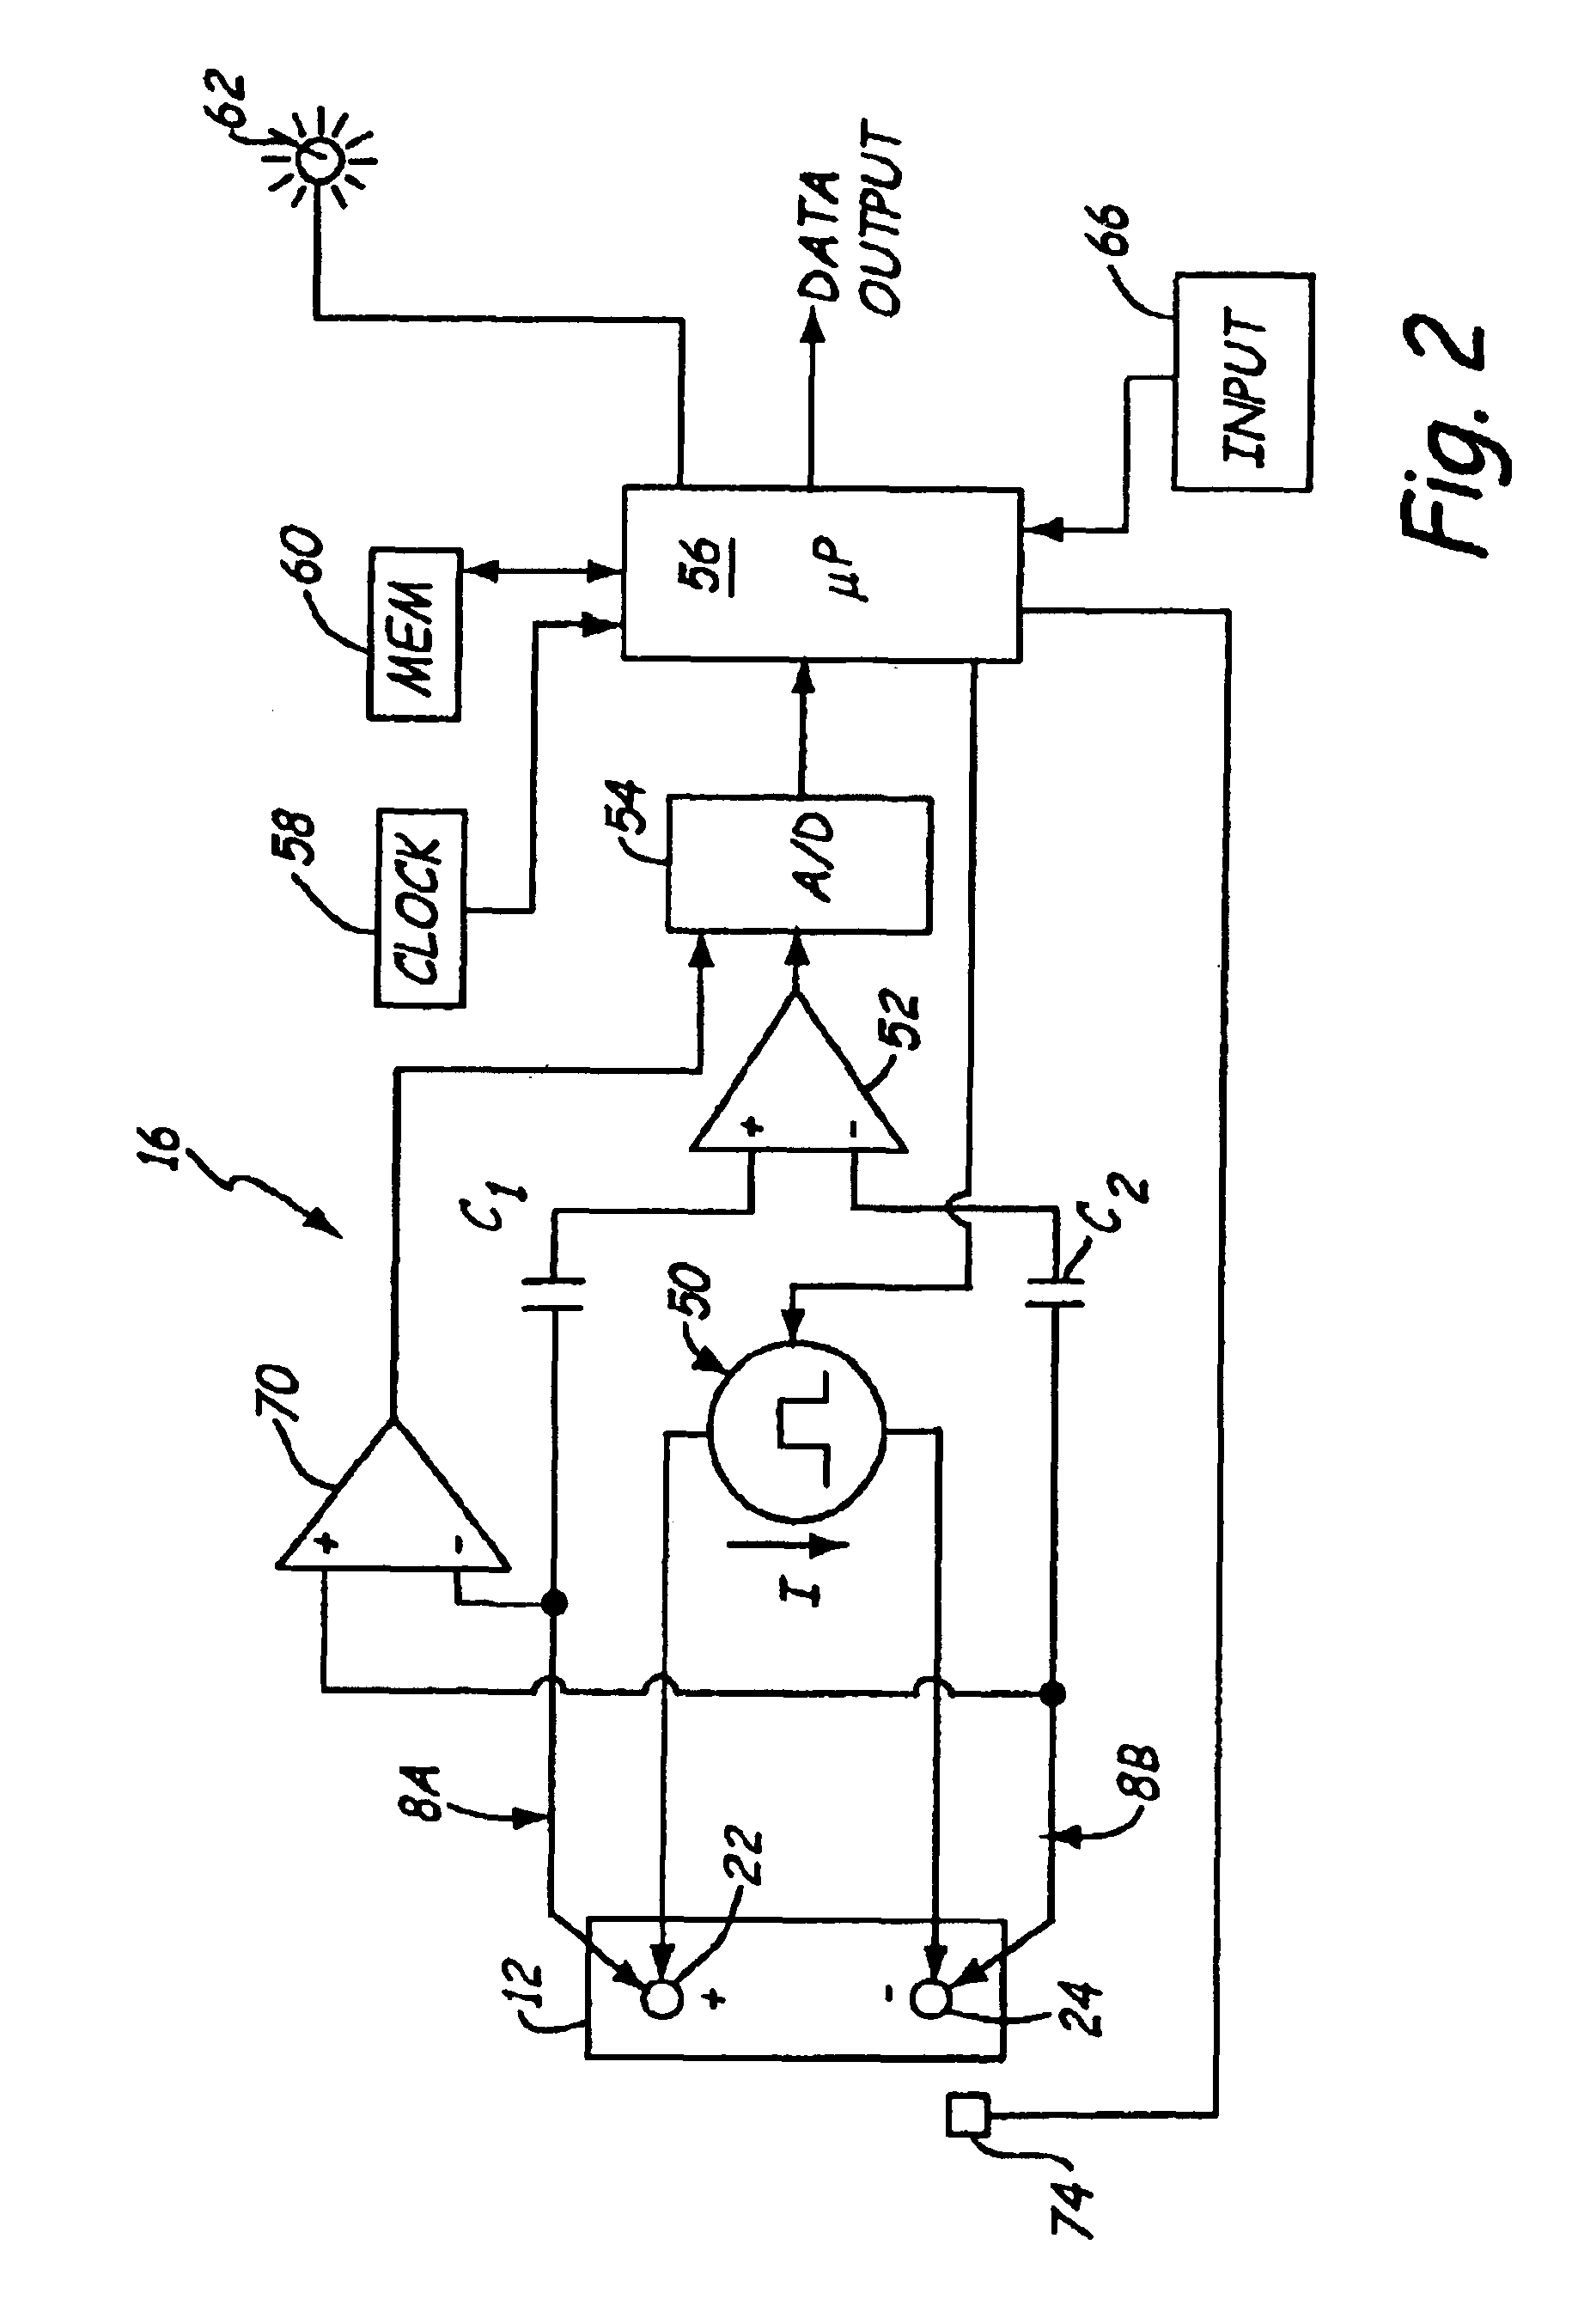 Electronic battery tester with battery failure temperature determination